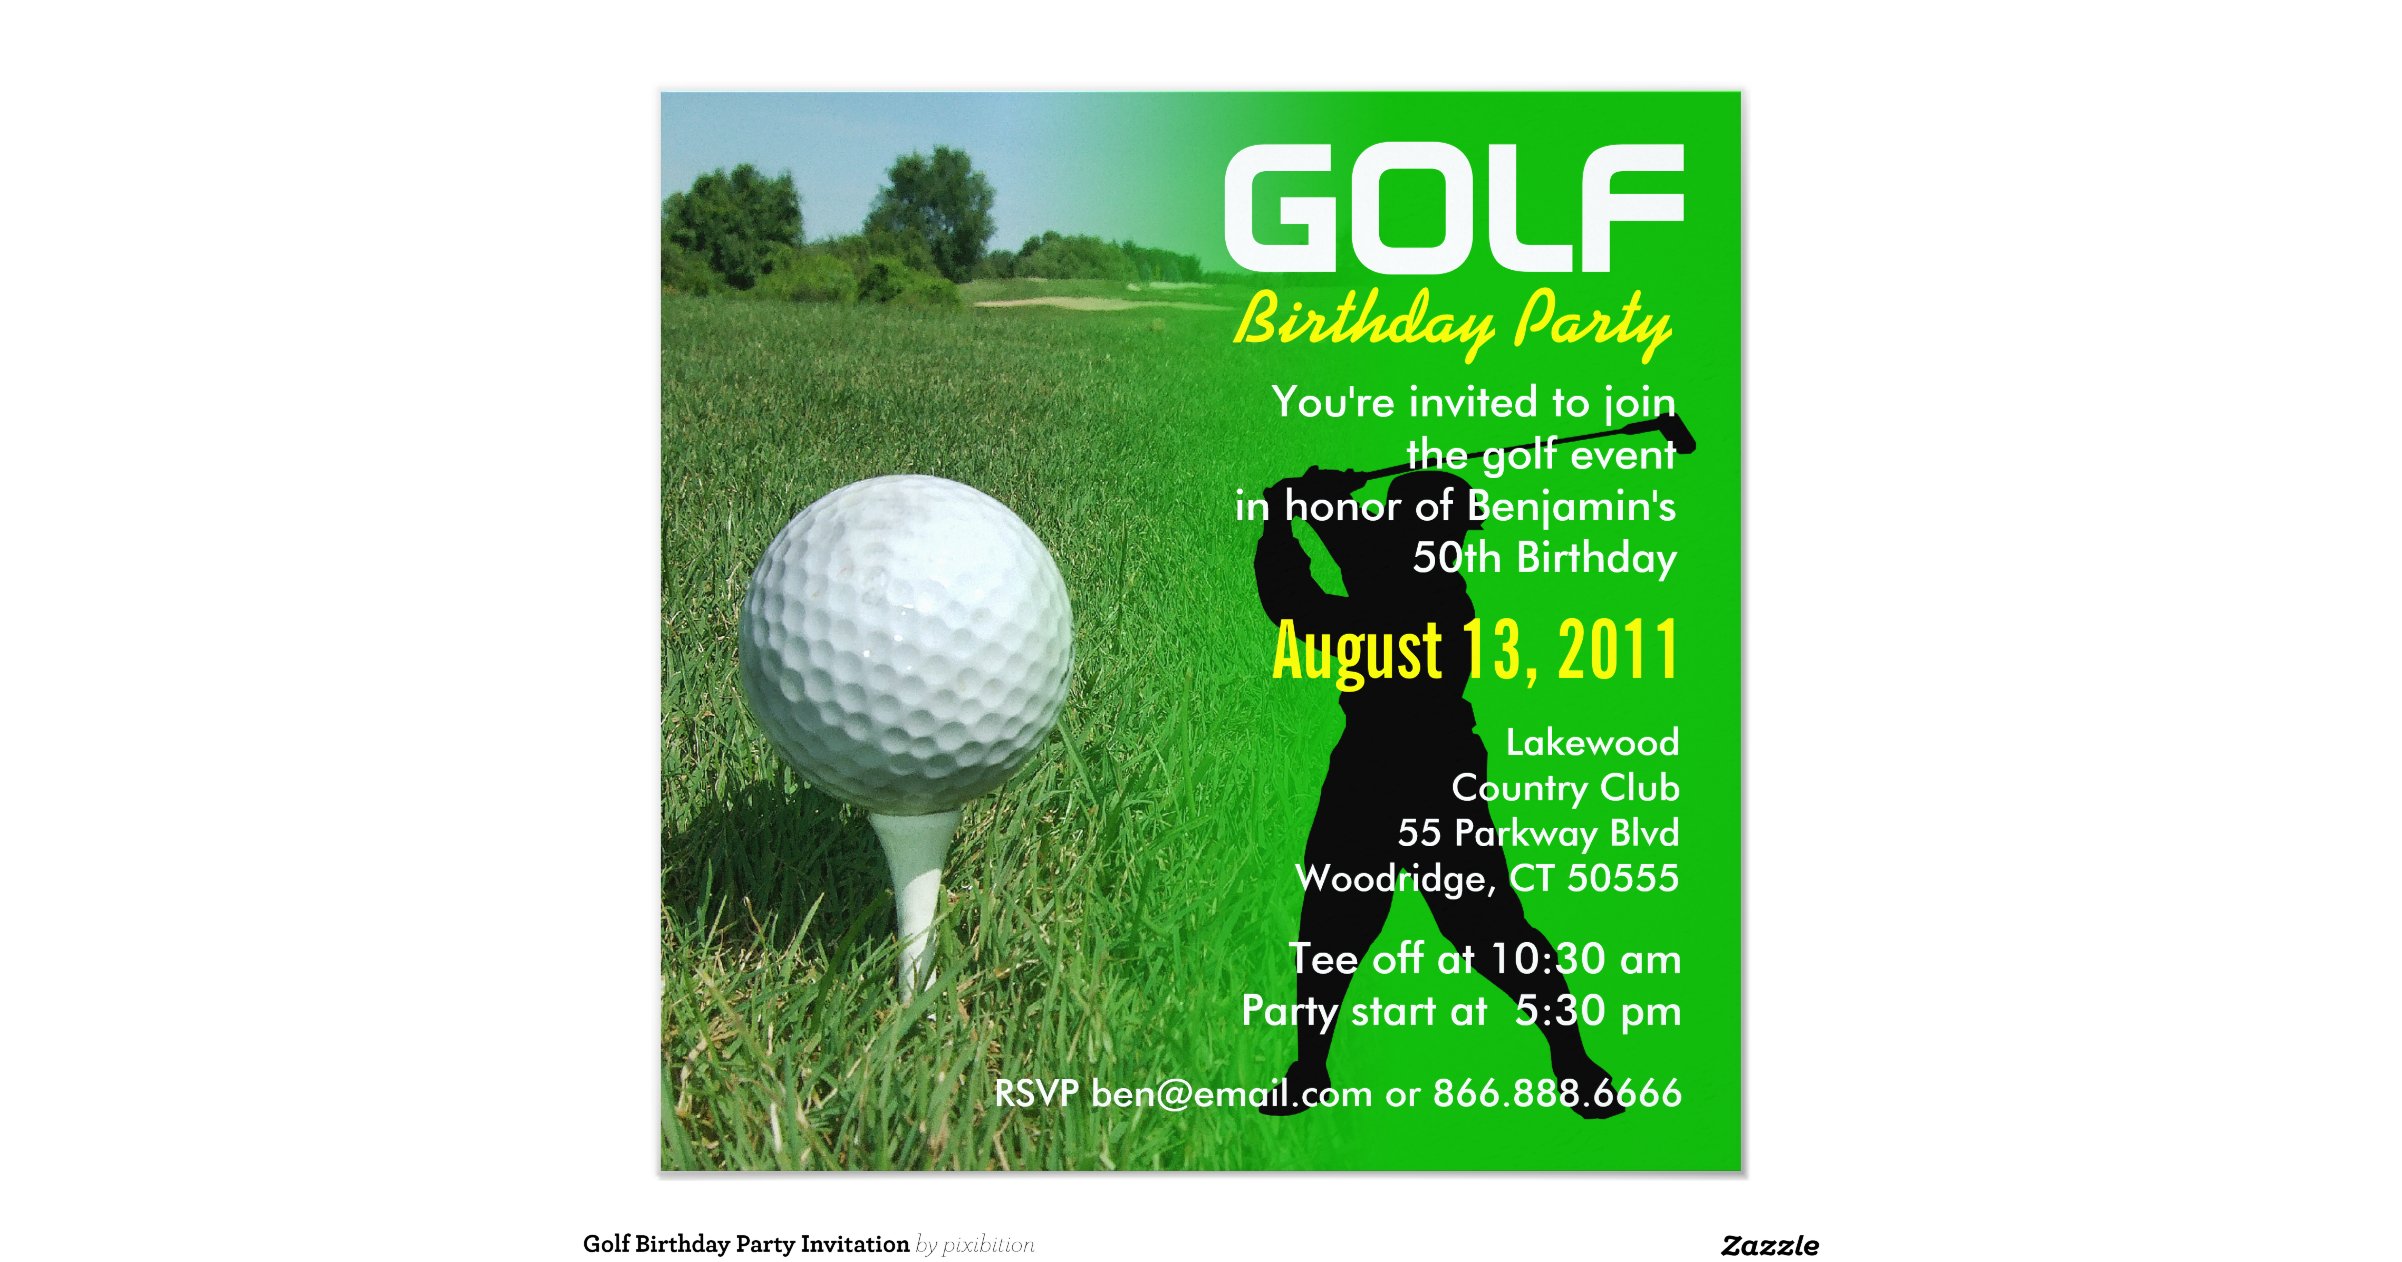 golf_birthday_party_invitation-rb429fad80ed44489a88522d961ddca80_zk9yv